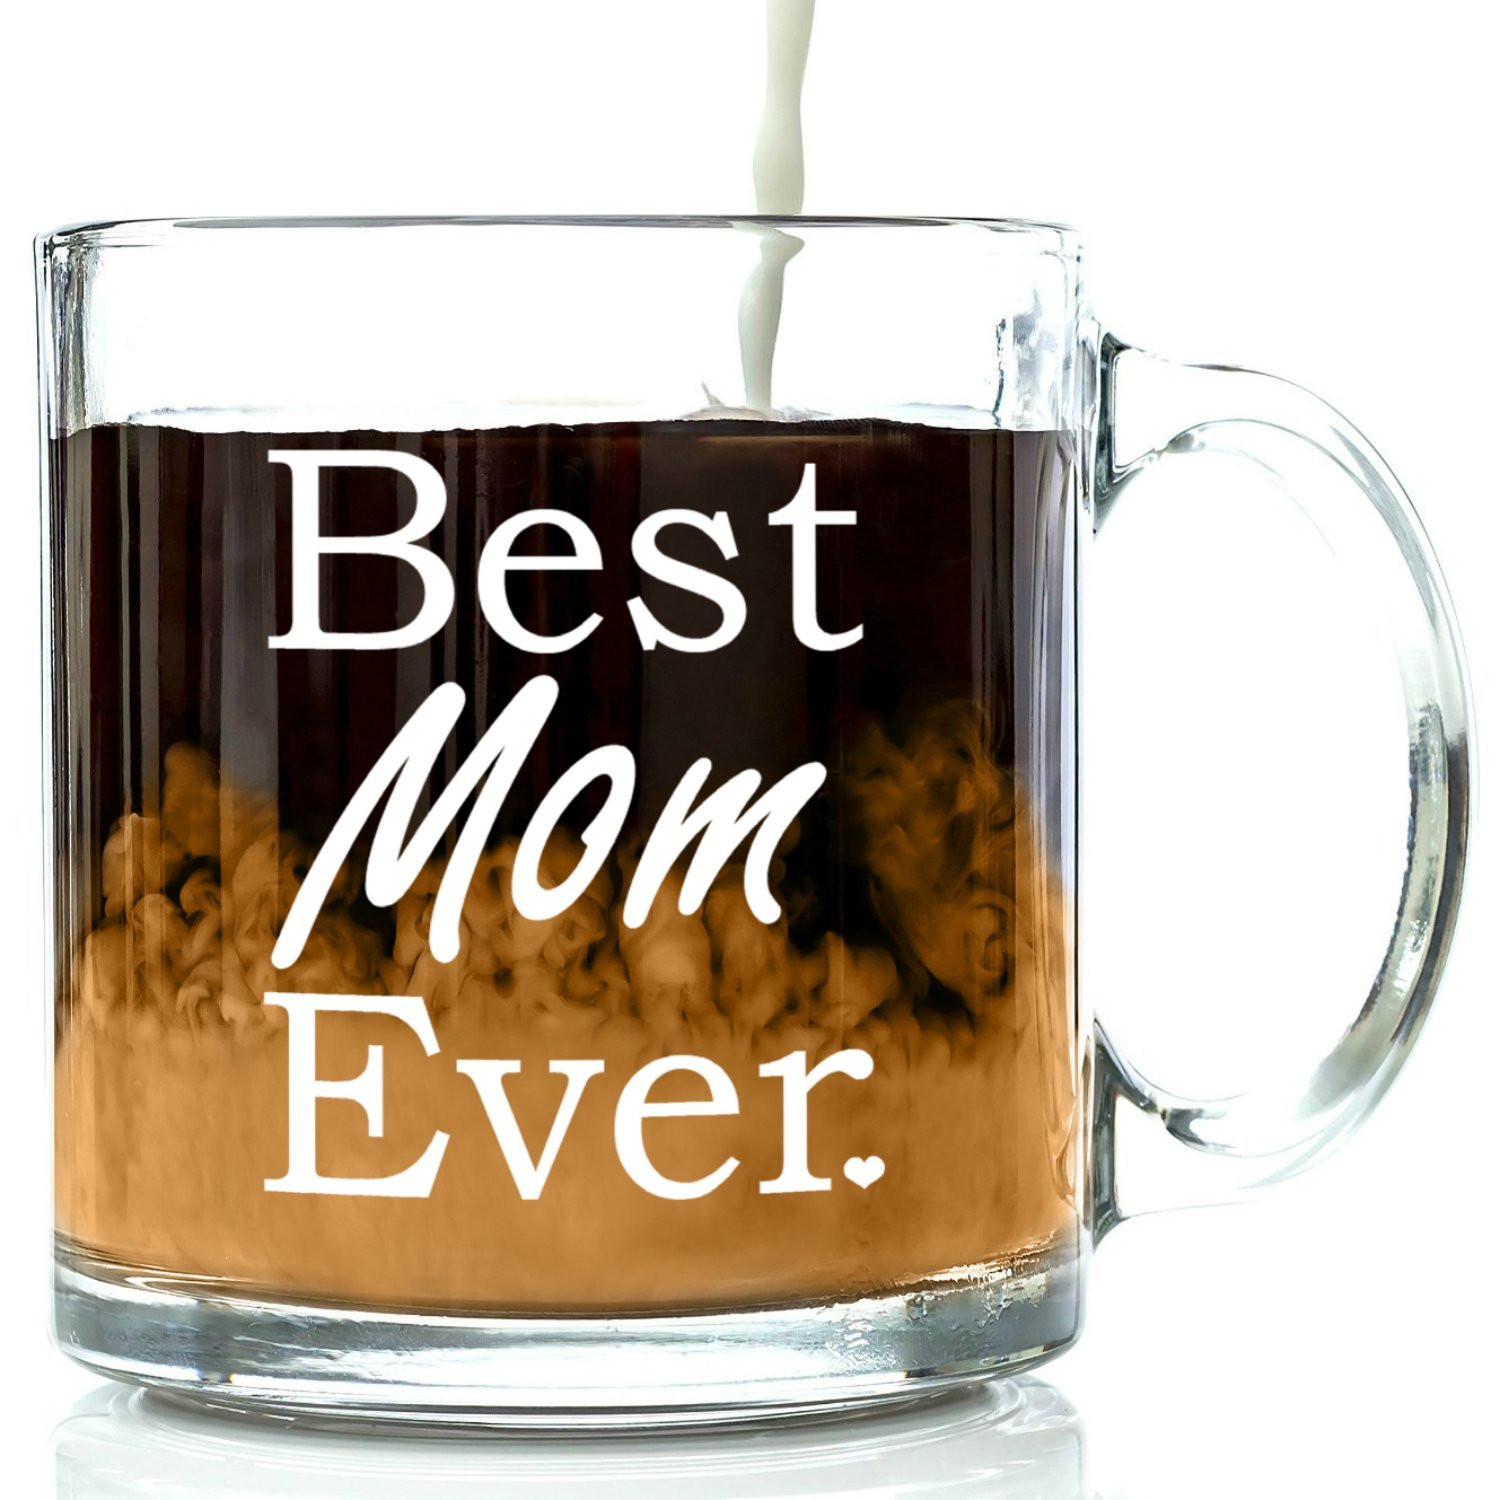 1St Mothers Day Gift Ideas
 First Mother s Day Gifts 70 Top Gift ideas for 1st